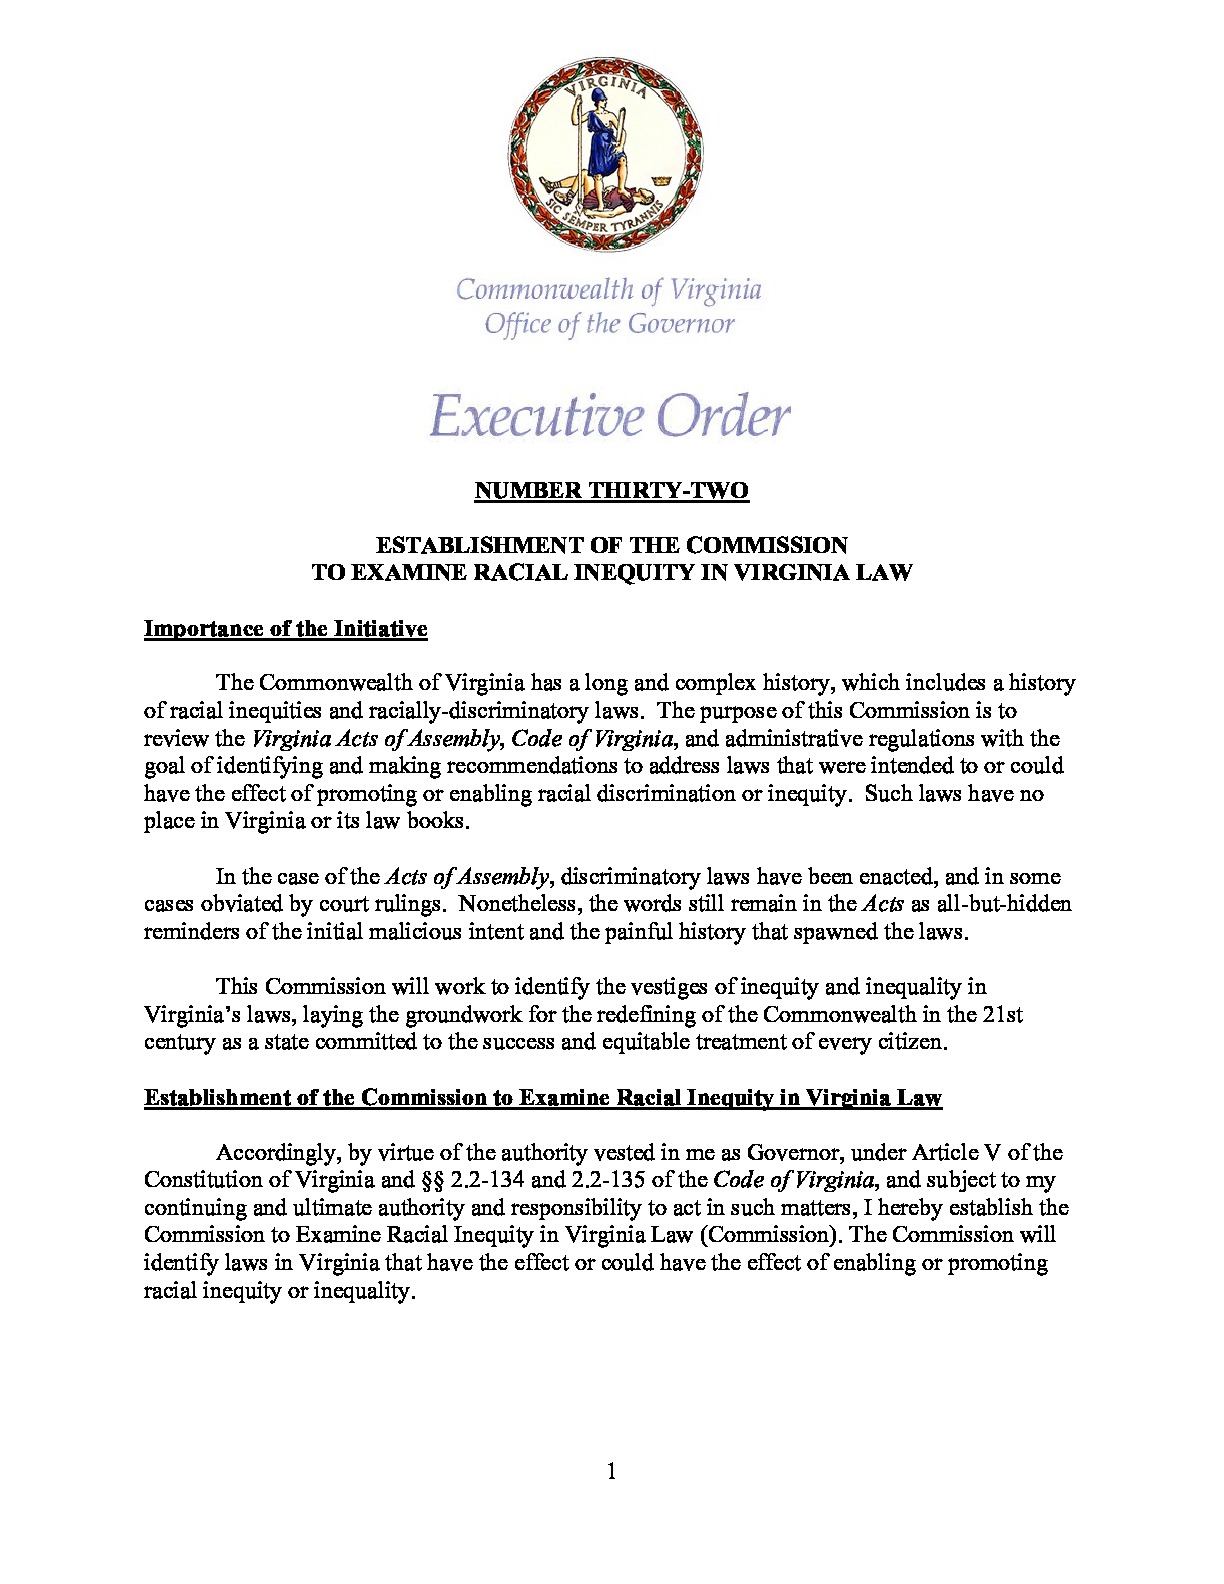 EO-32-Establishment-of-the-Commission-to-Examine-Racial-Inequity-in-Virginia-Law.pdf